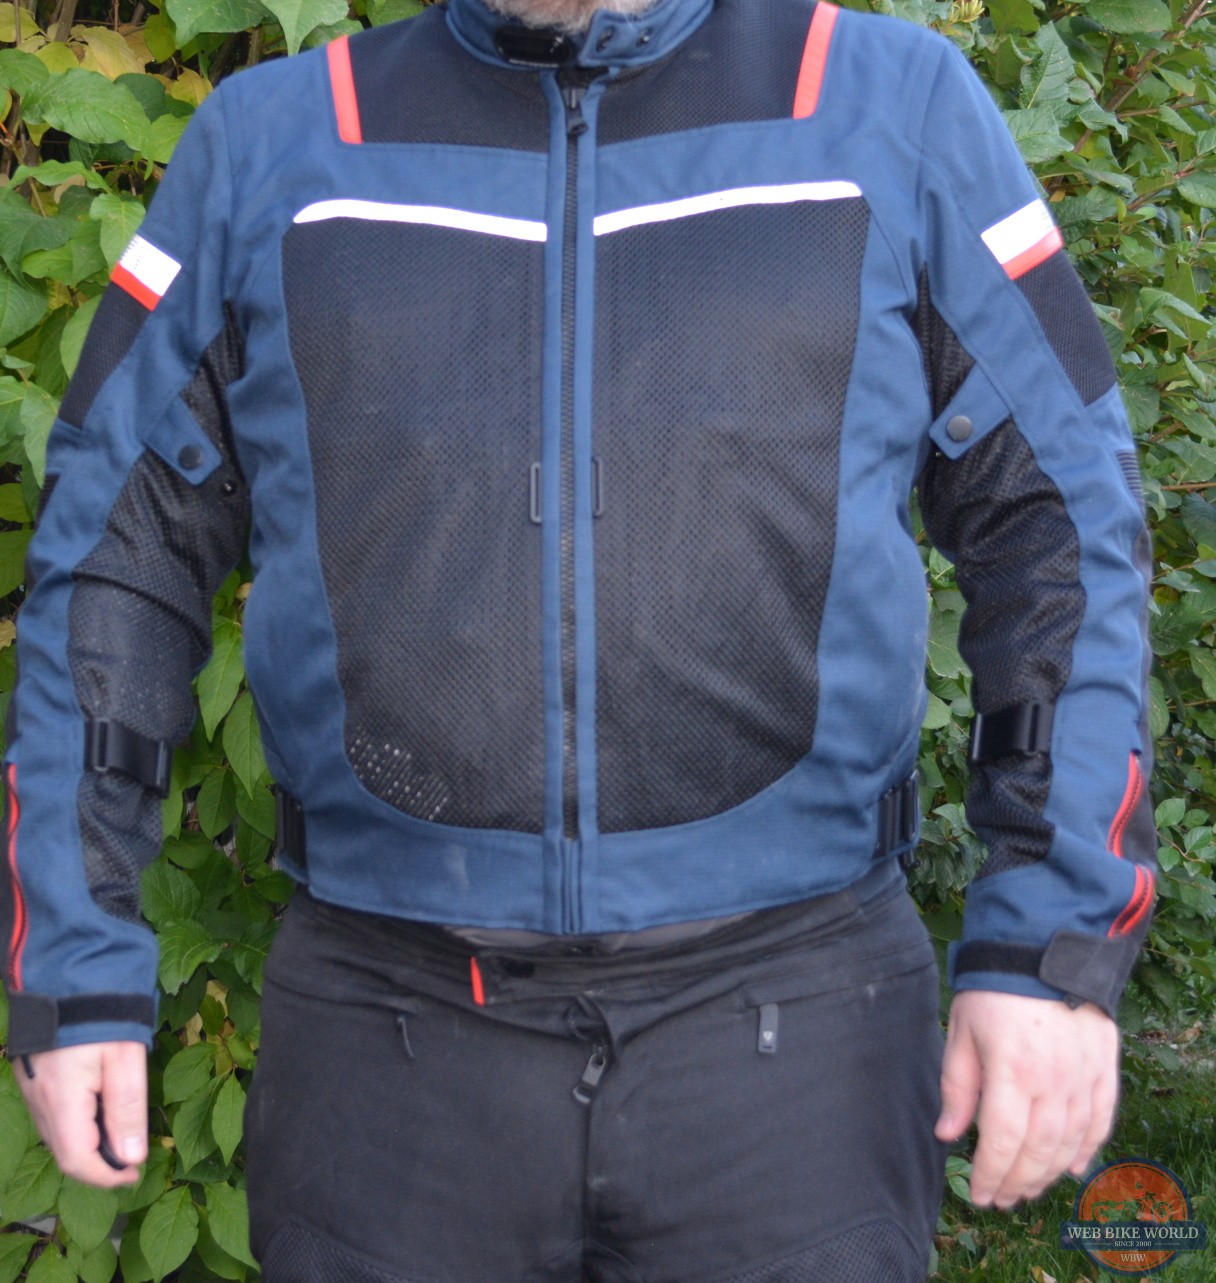 A front view of the Rev’It! Tornado 3 Mesh Jacket; There is a noticeable gap between the jacket and the pants.